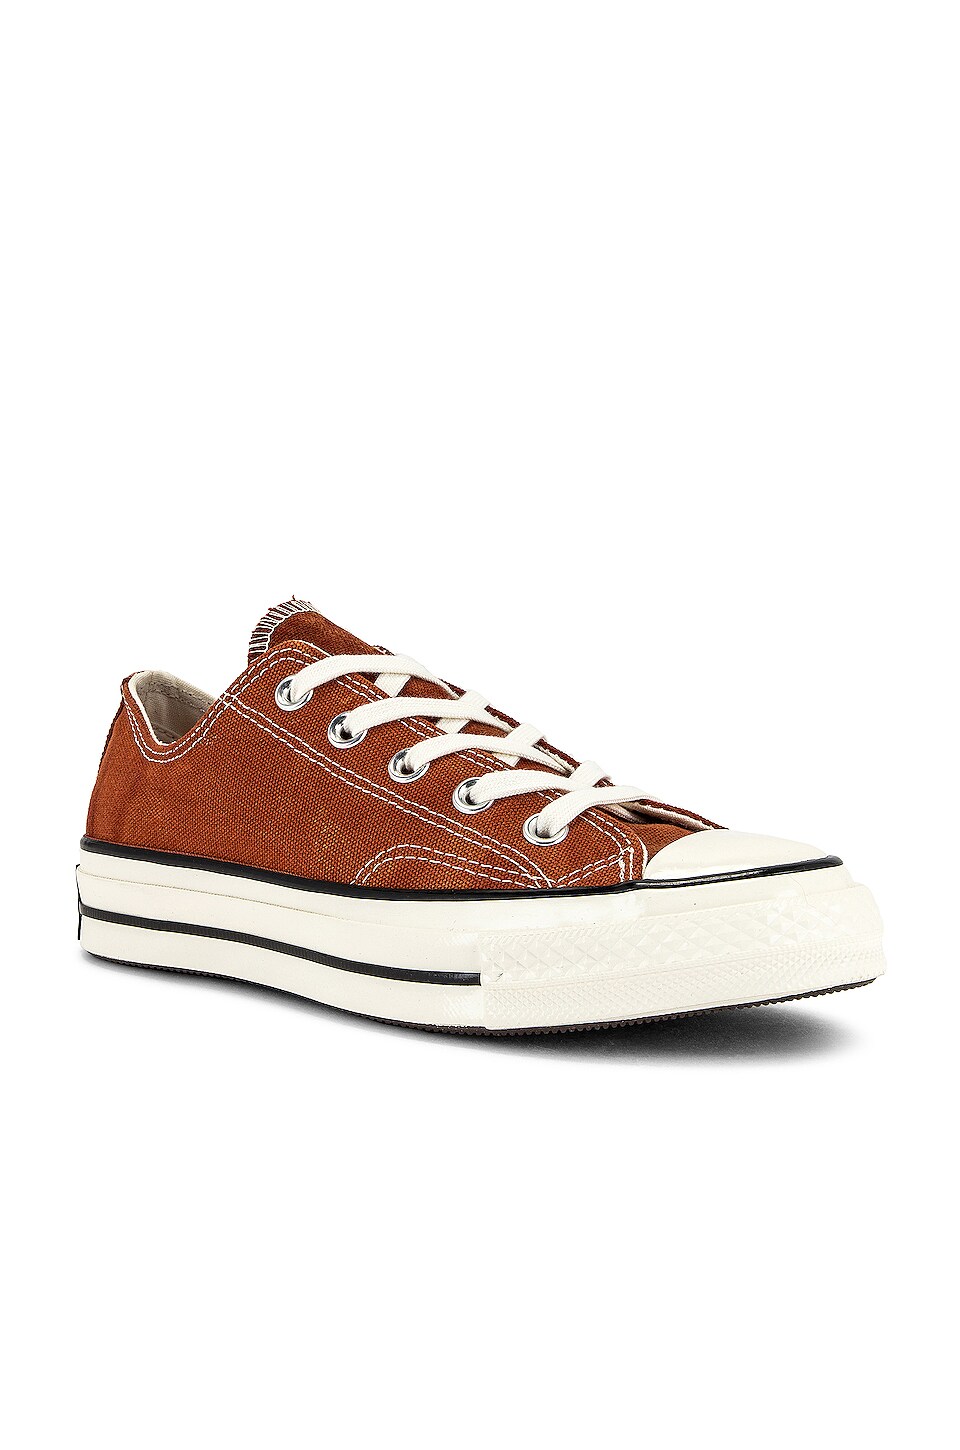 Converse Chuck 70 Ox Washed Canvas Red Bark